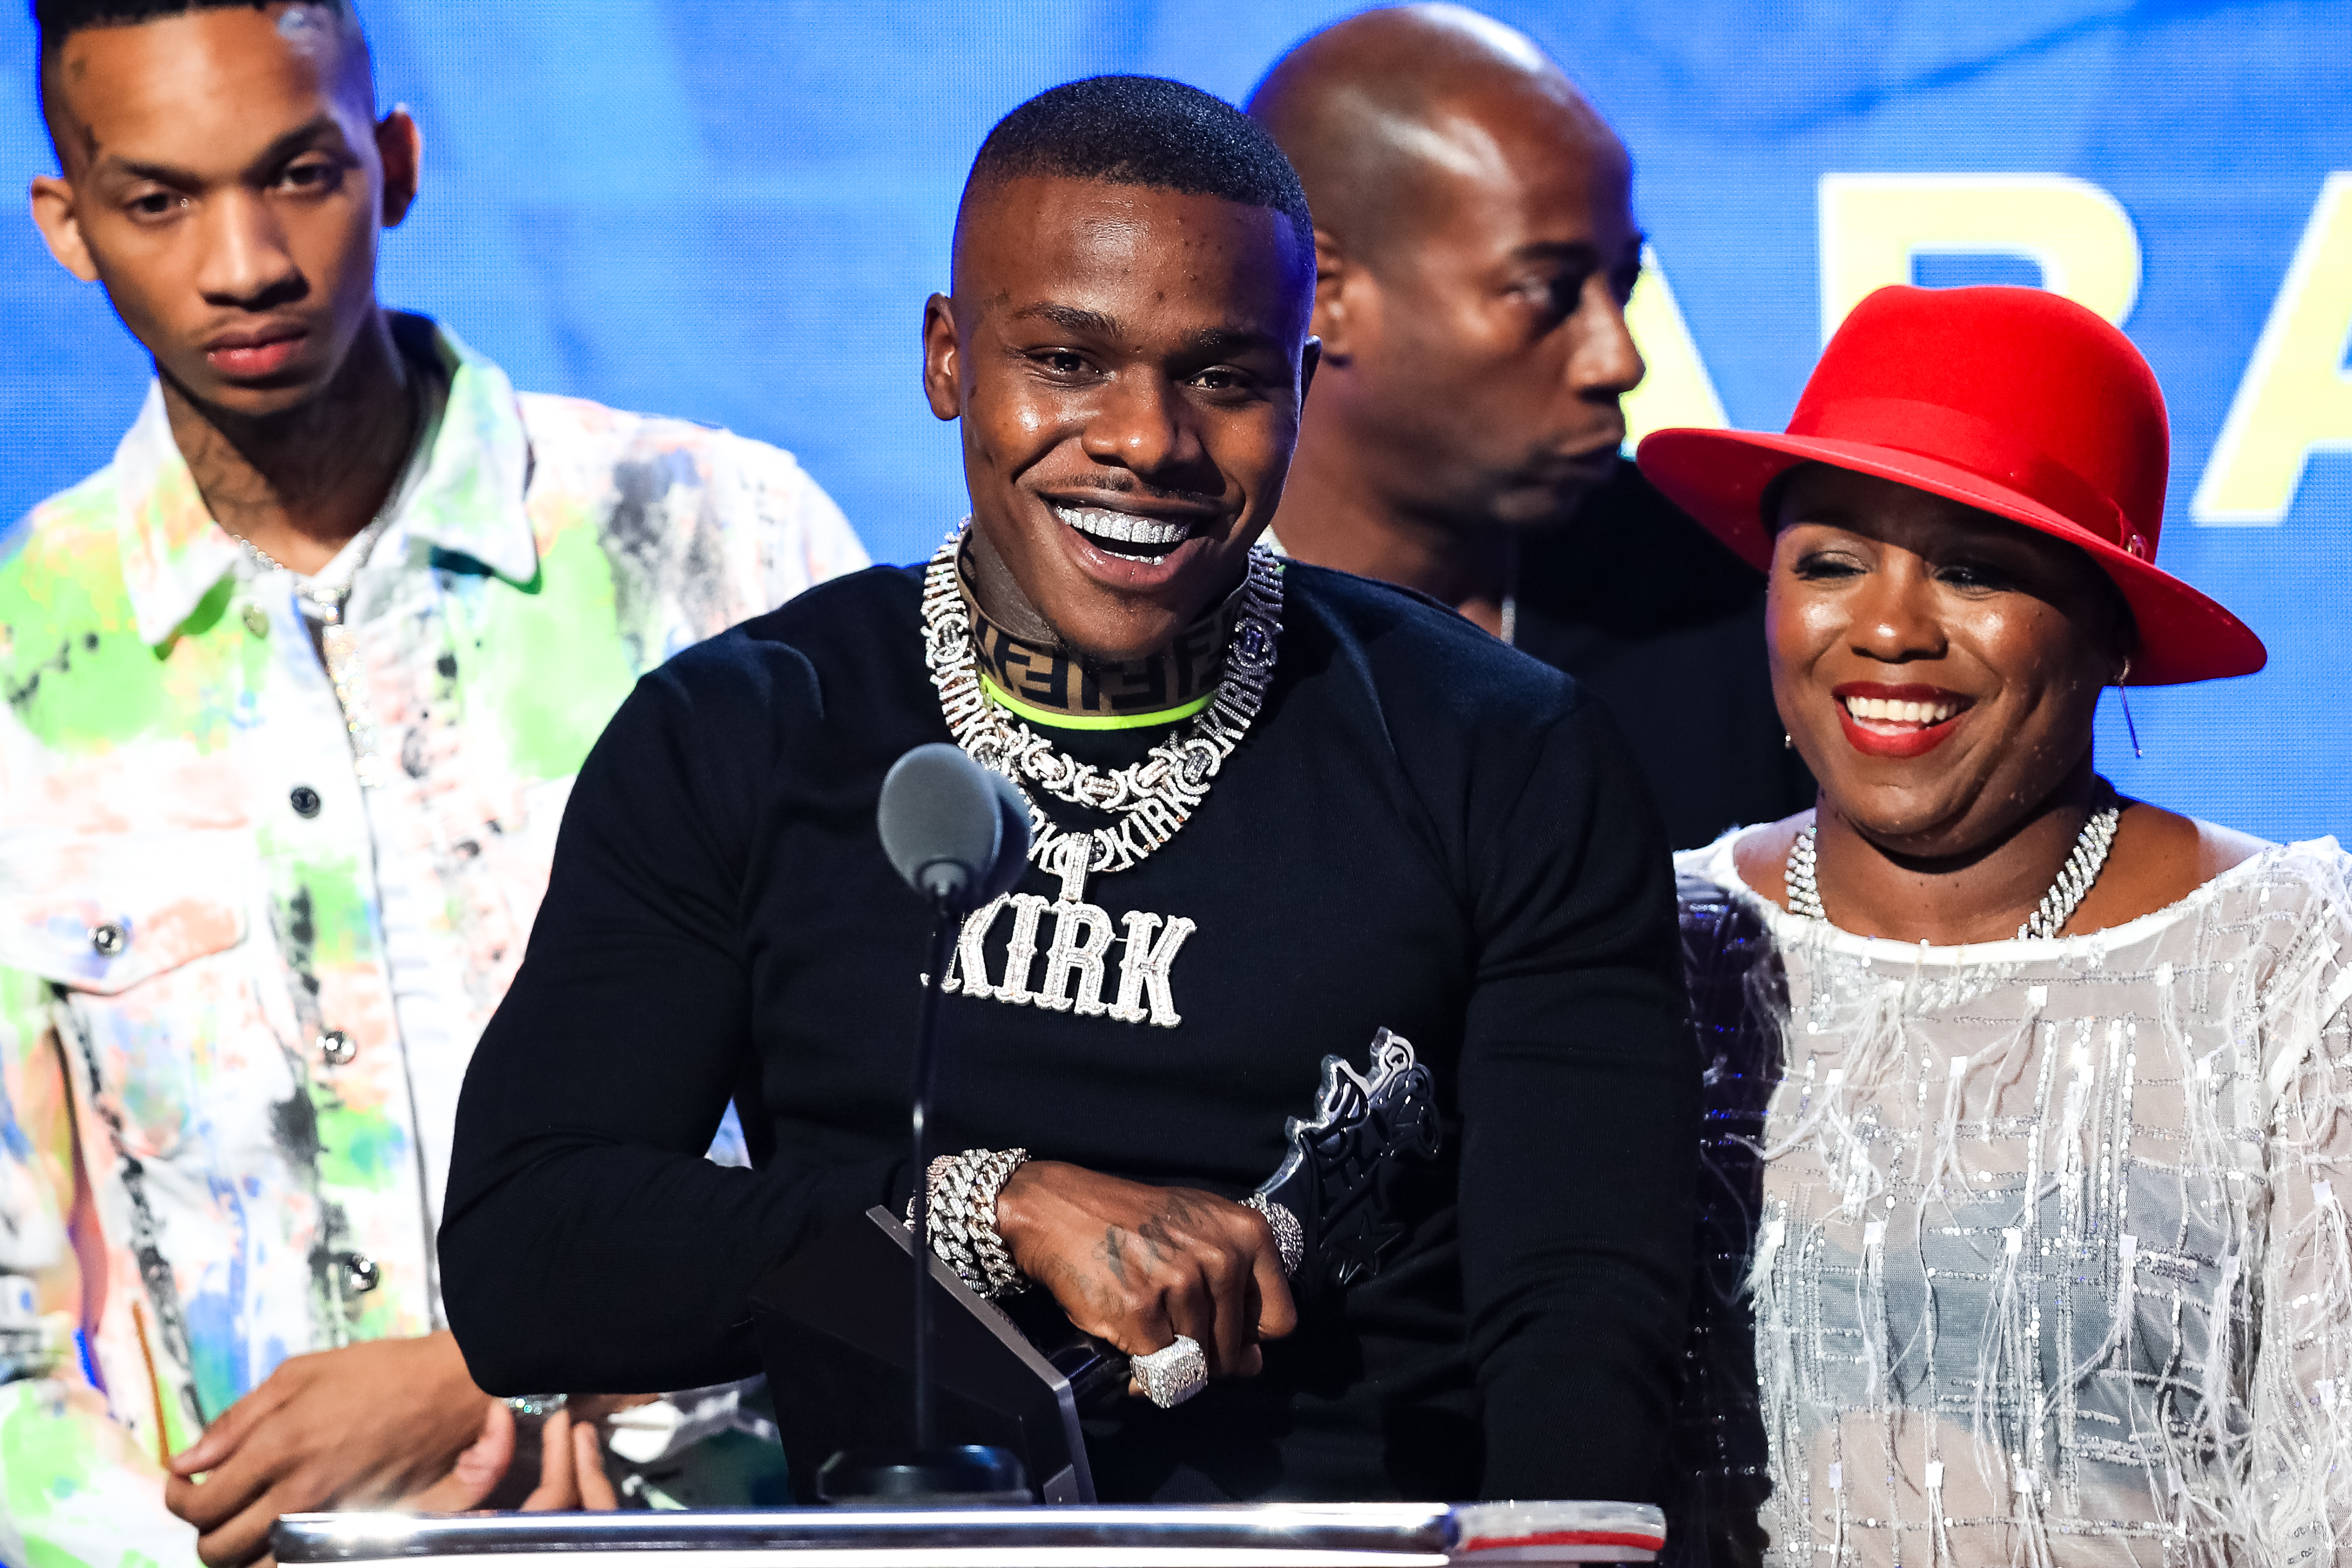 DaBaby's BET Hip Hop Awards Outfit Sparked A Wide Range Of Twitter Reactions